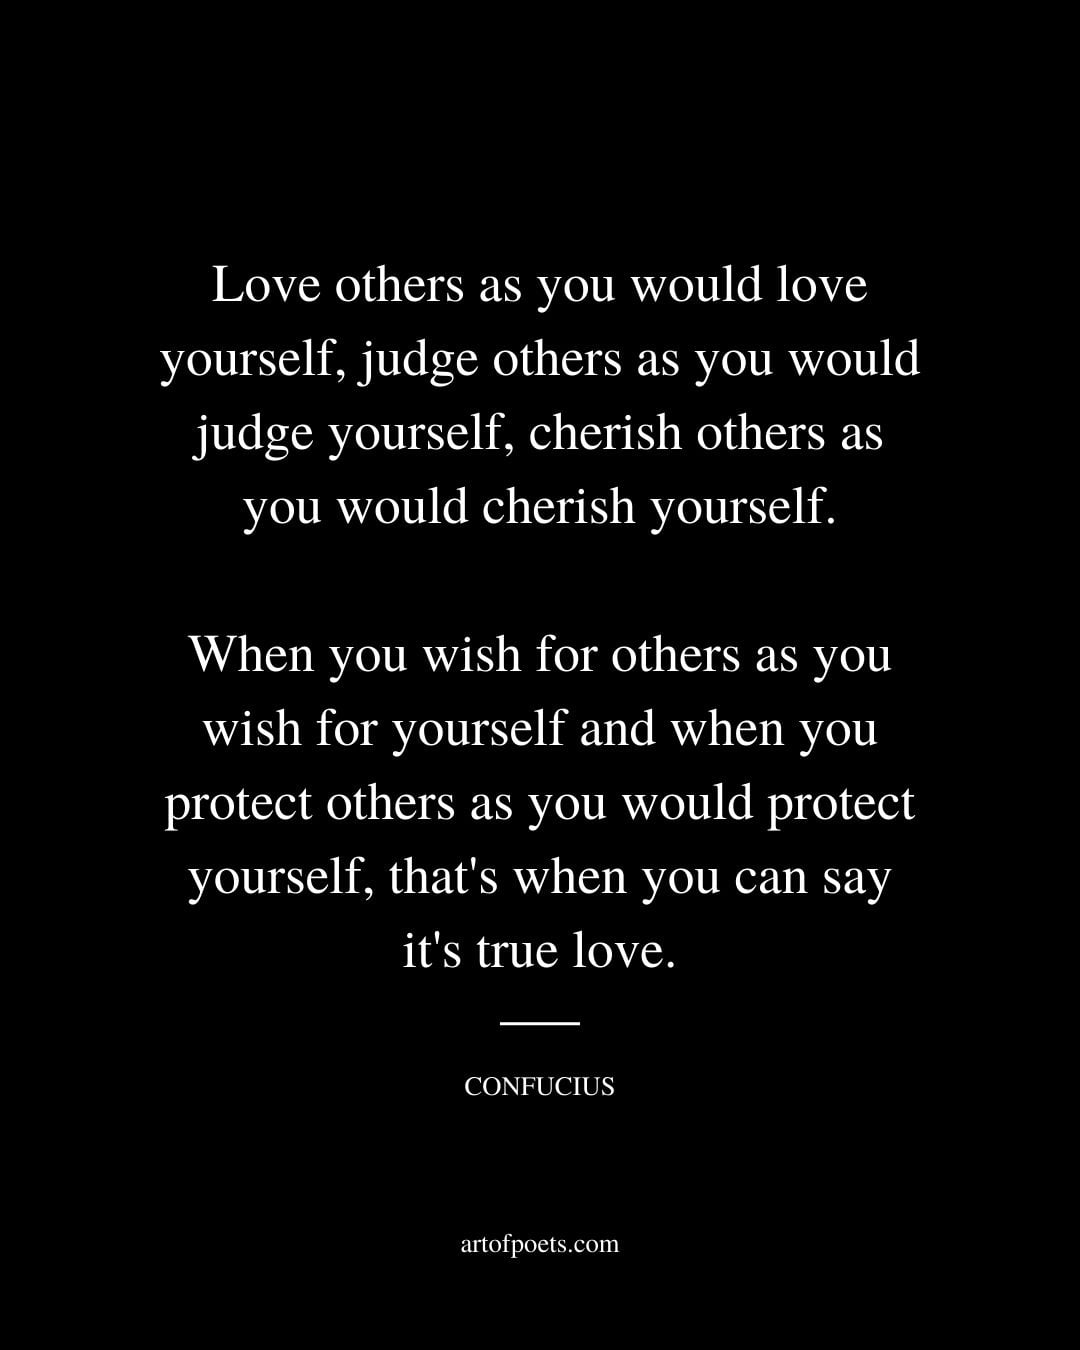 Love others as you would love yourself judge others as you would judge yourself cherish others as you would cherish yourself